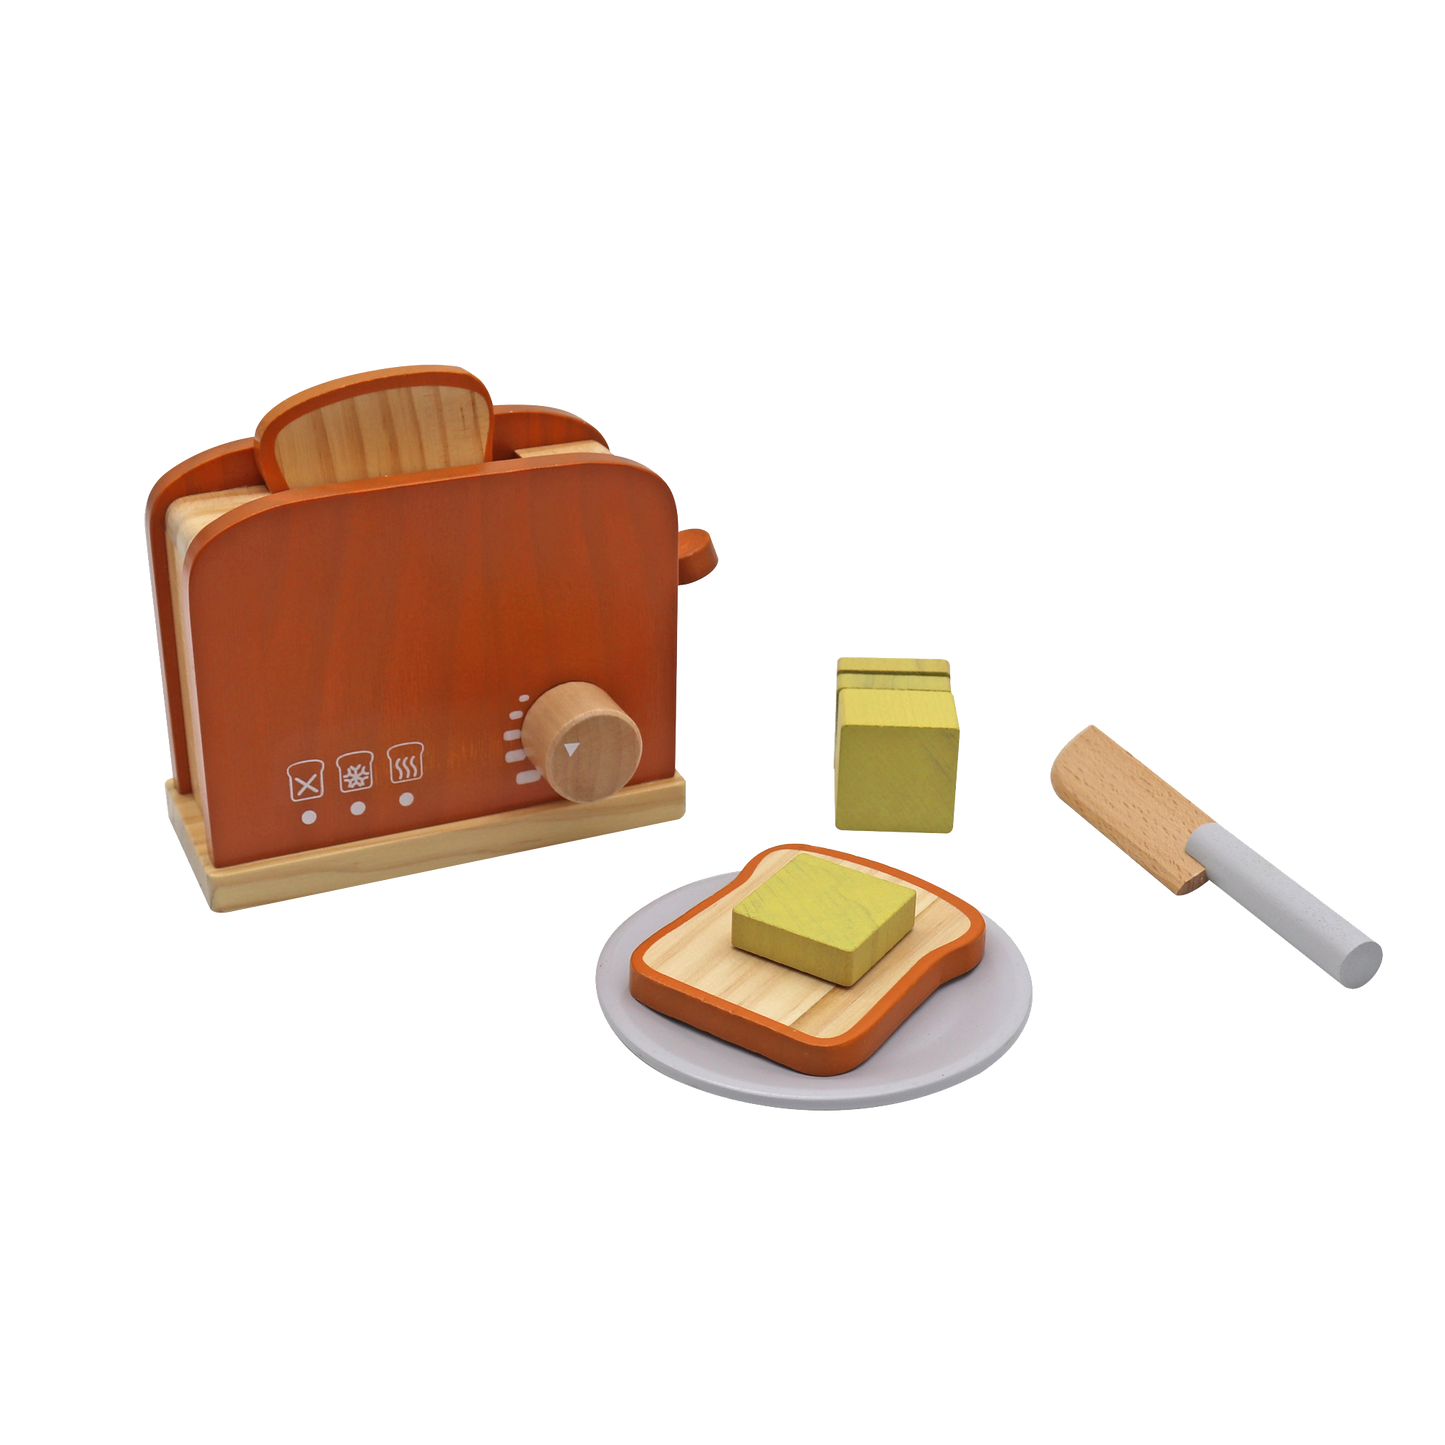 Wooden Toaster set for your child pretend play. Toast a bread, slice the butter, encourage creativity and imagination through pretend play